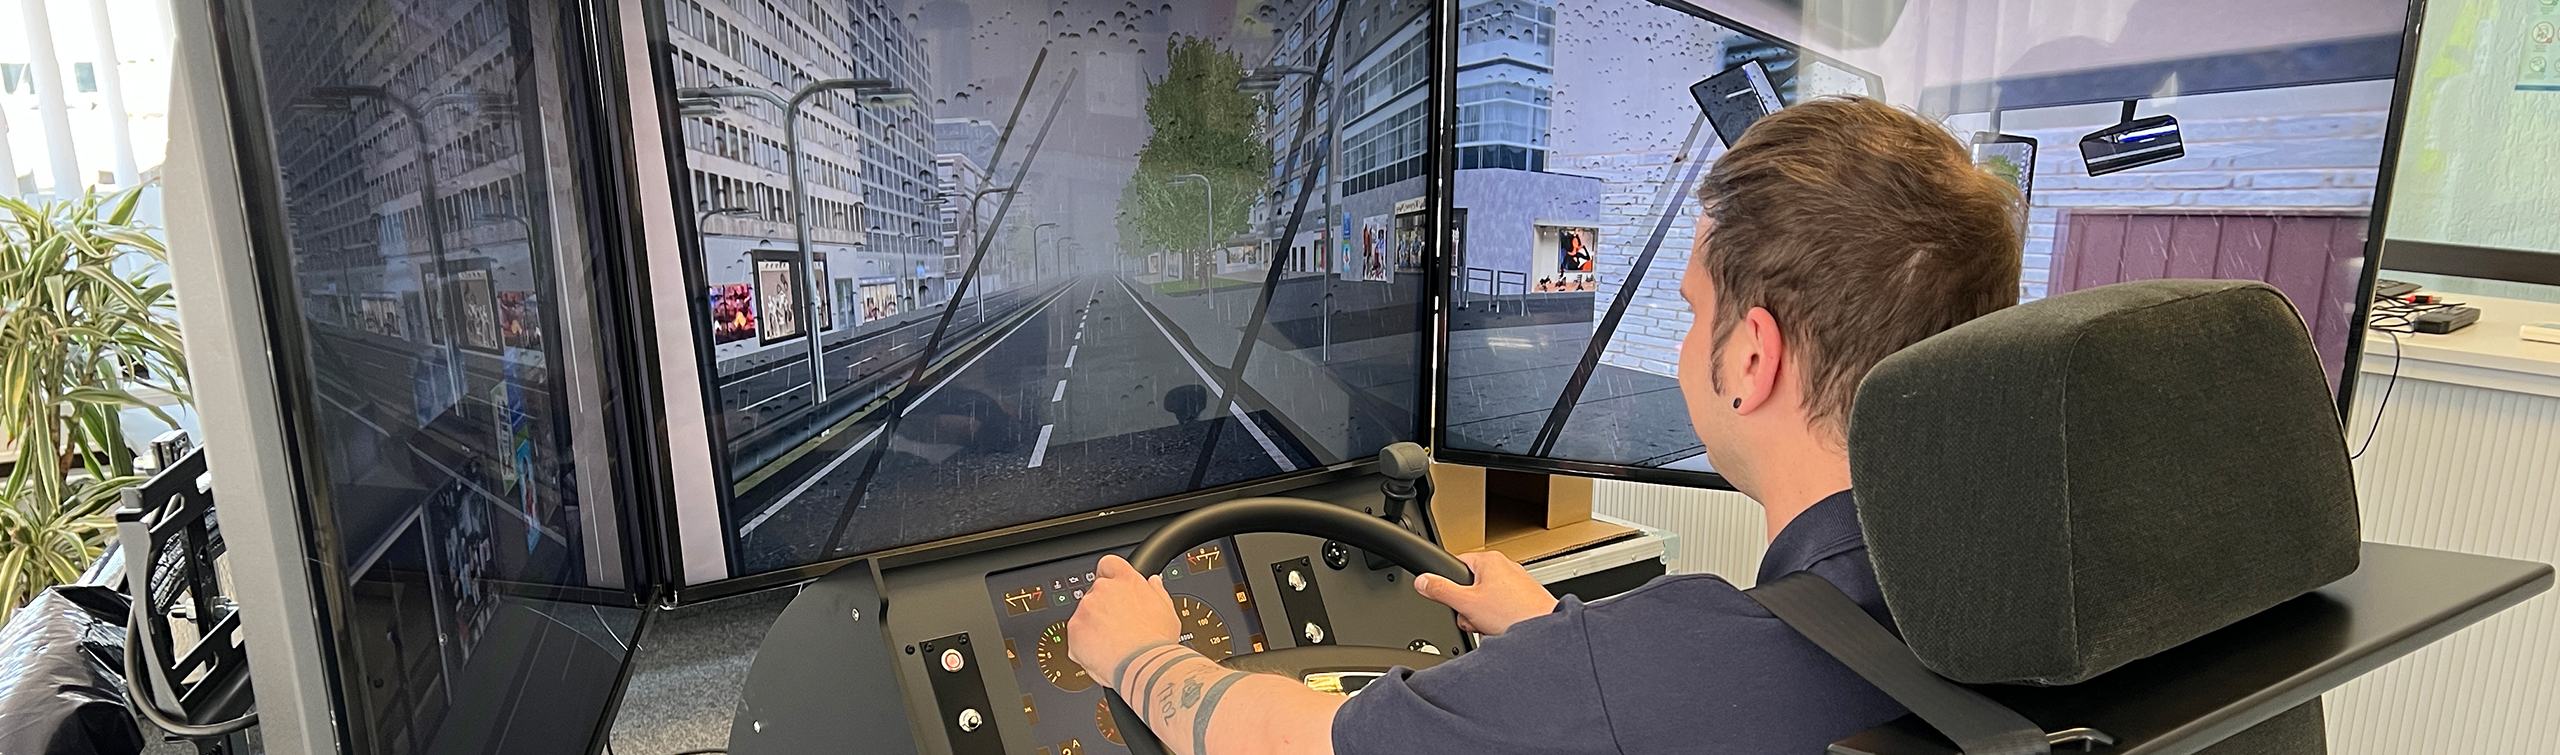 IFAT 2022: Recruiting with video box and driving simulator